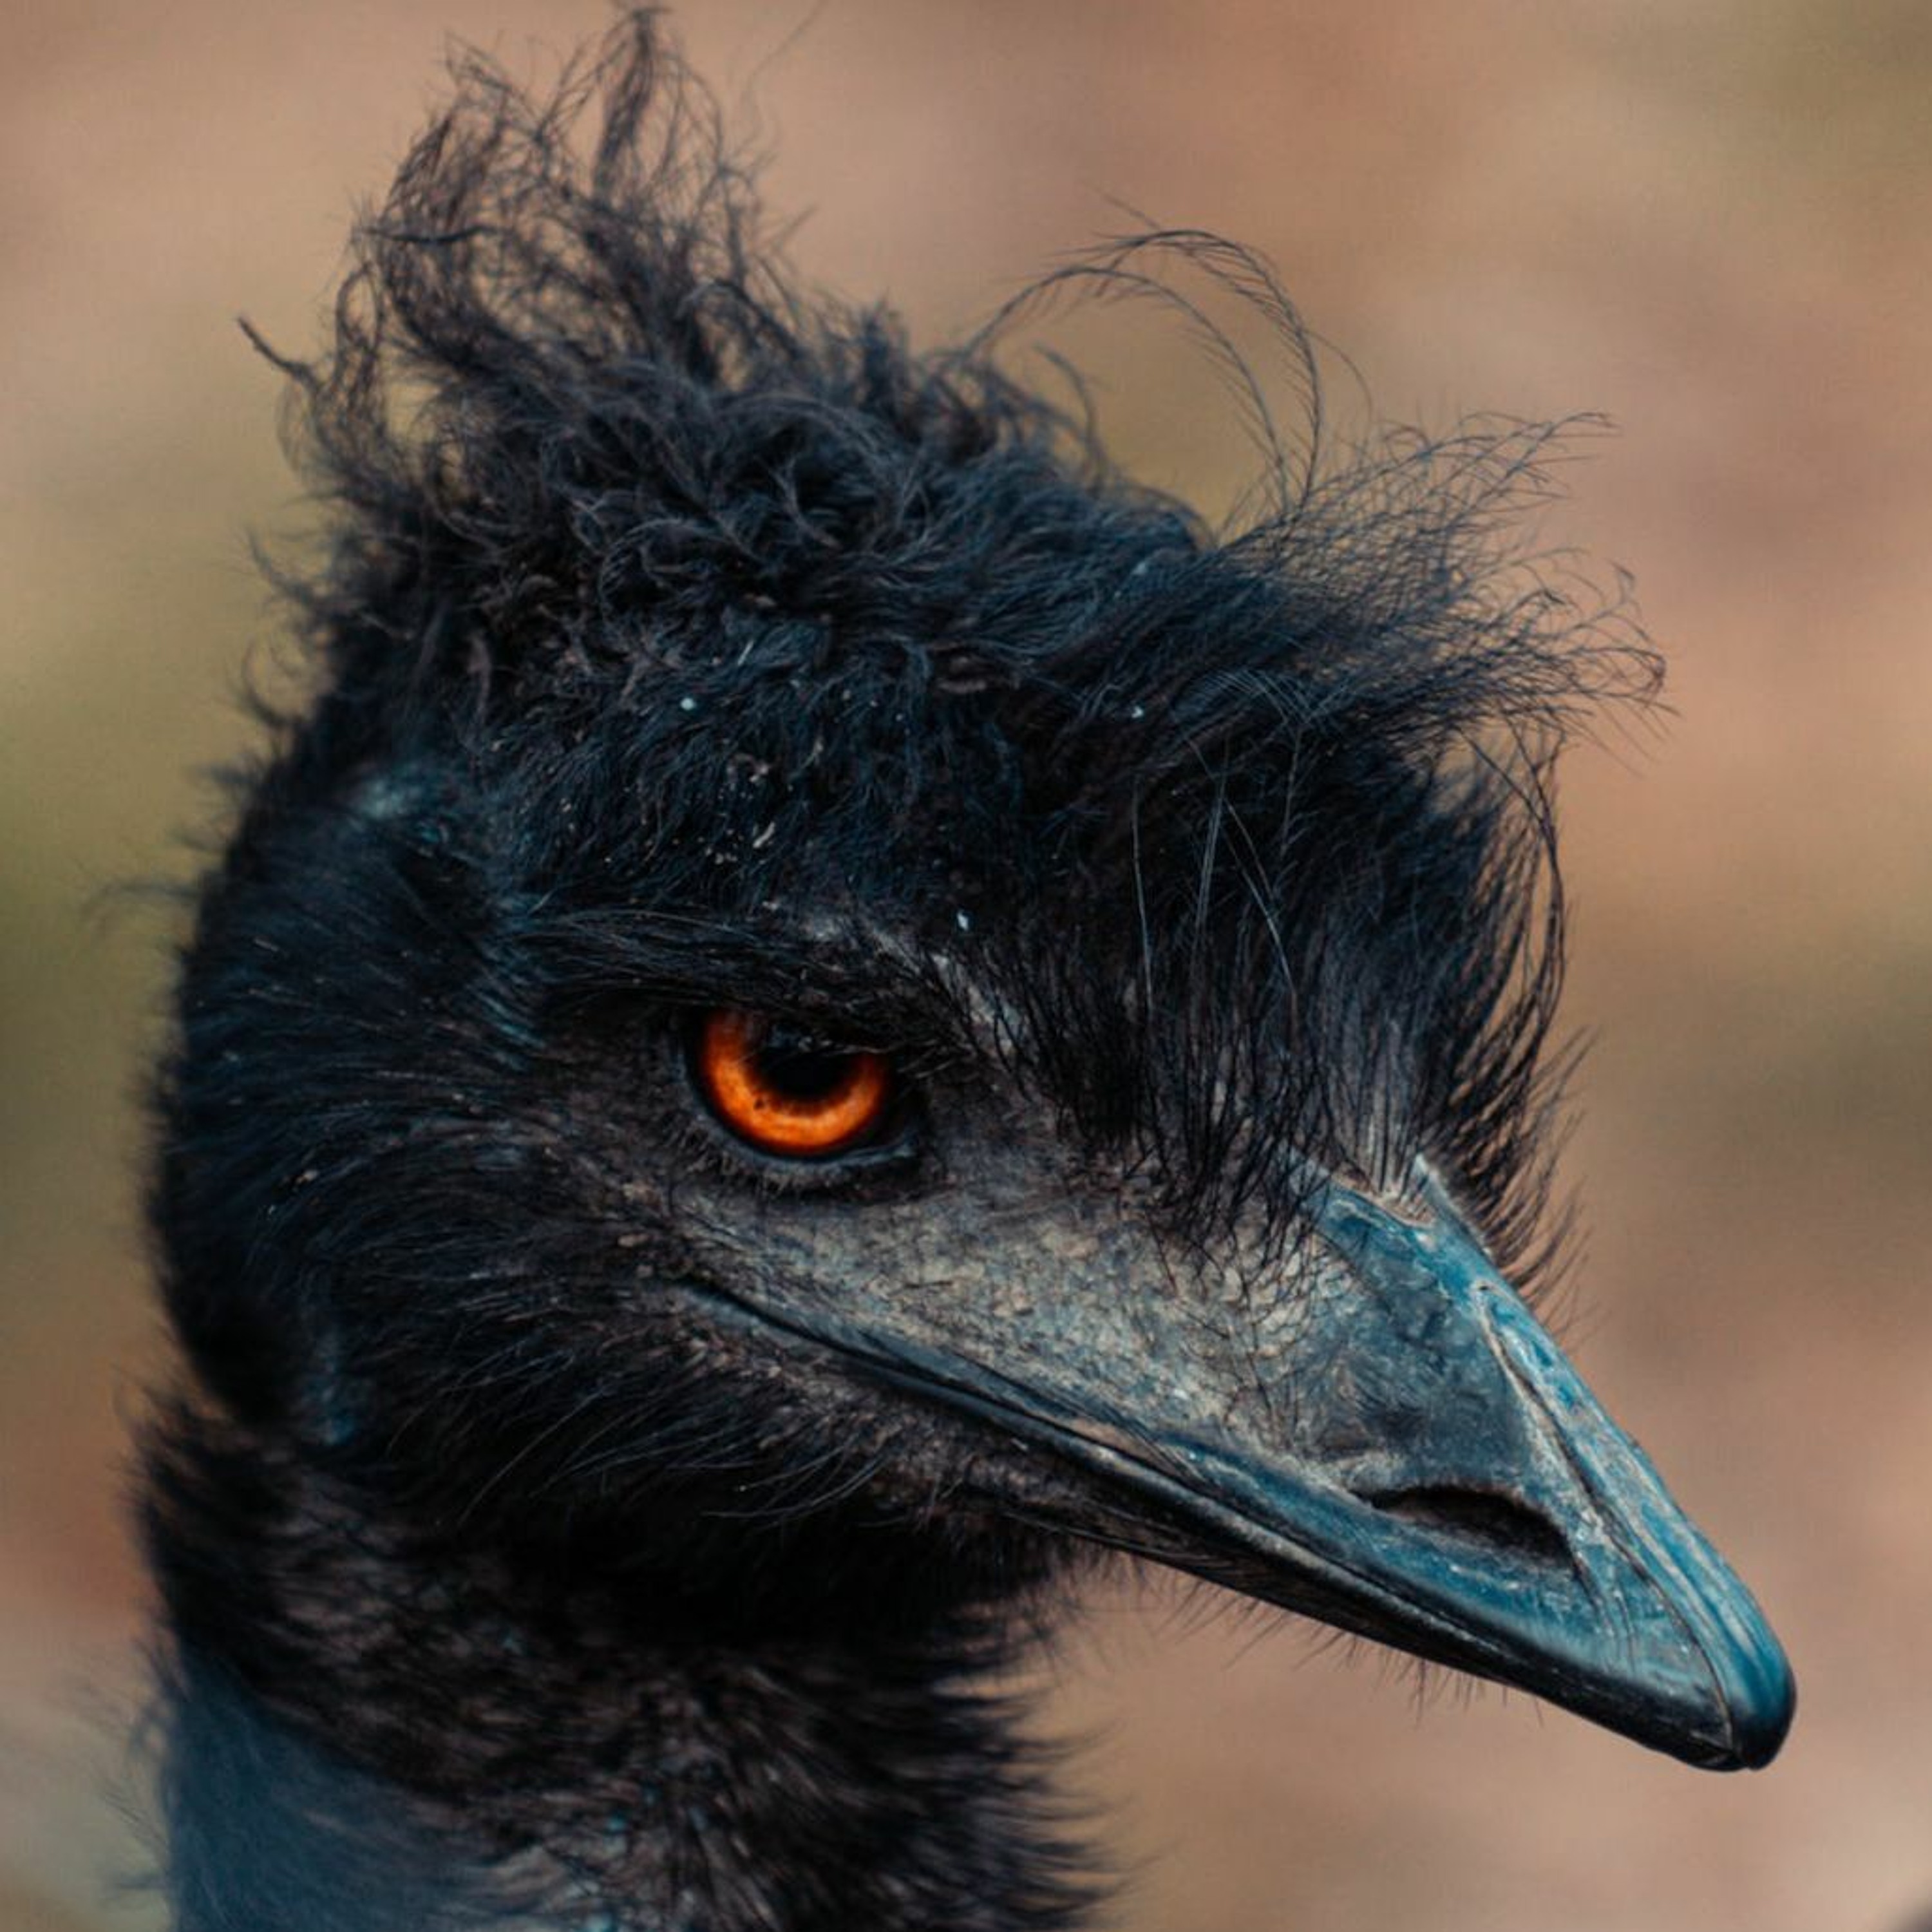 Episode 314: The Great Emu War of 1932